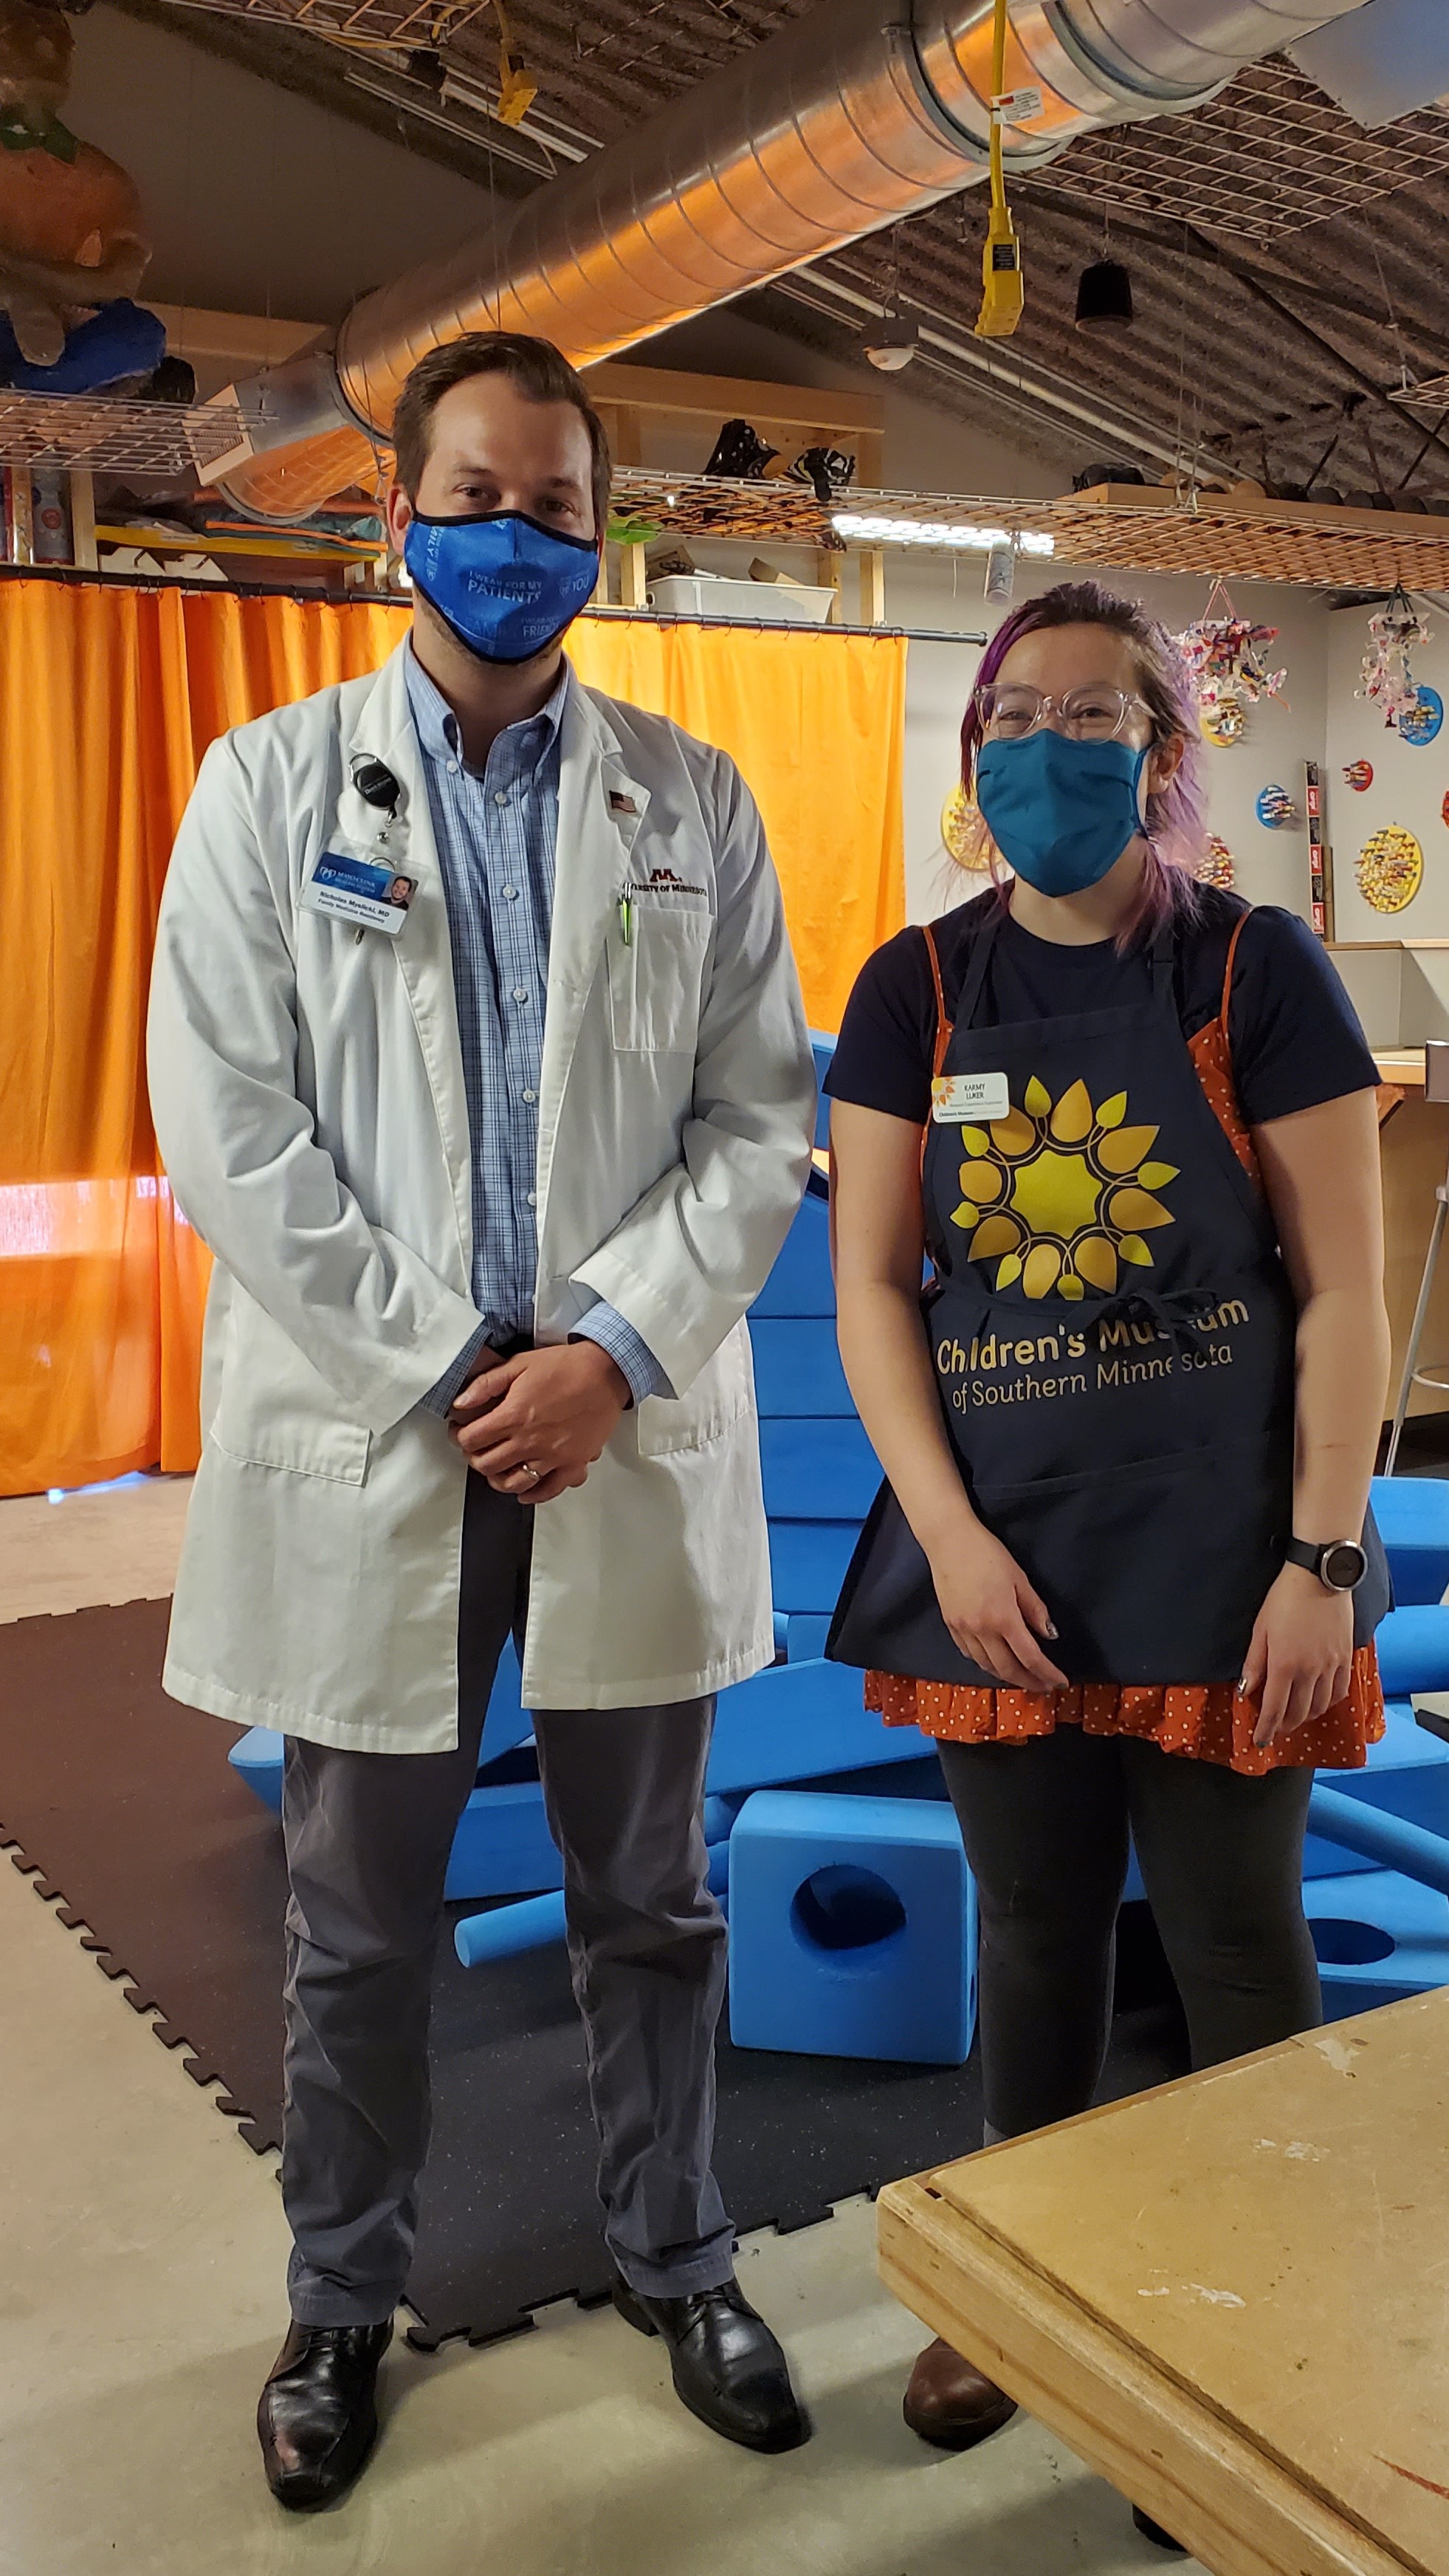 Mankato Family Medicine Residency Program residents can get experience at the local children's museum